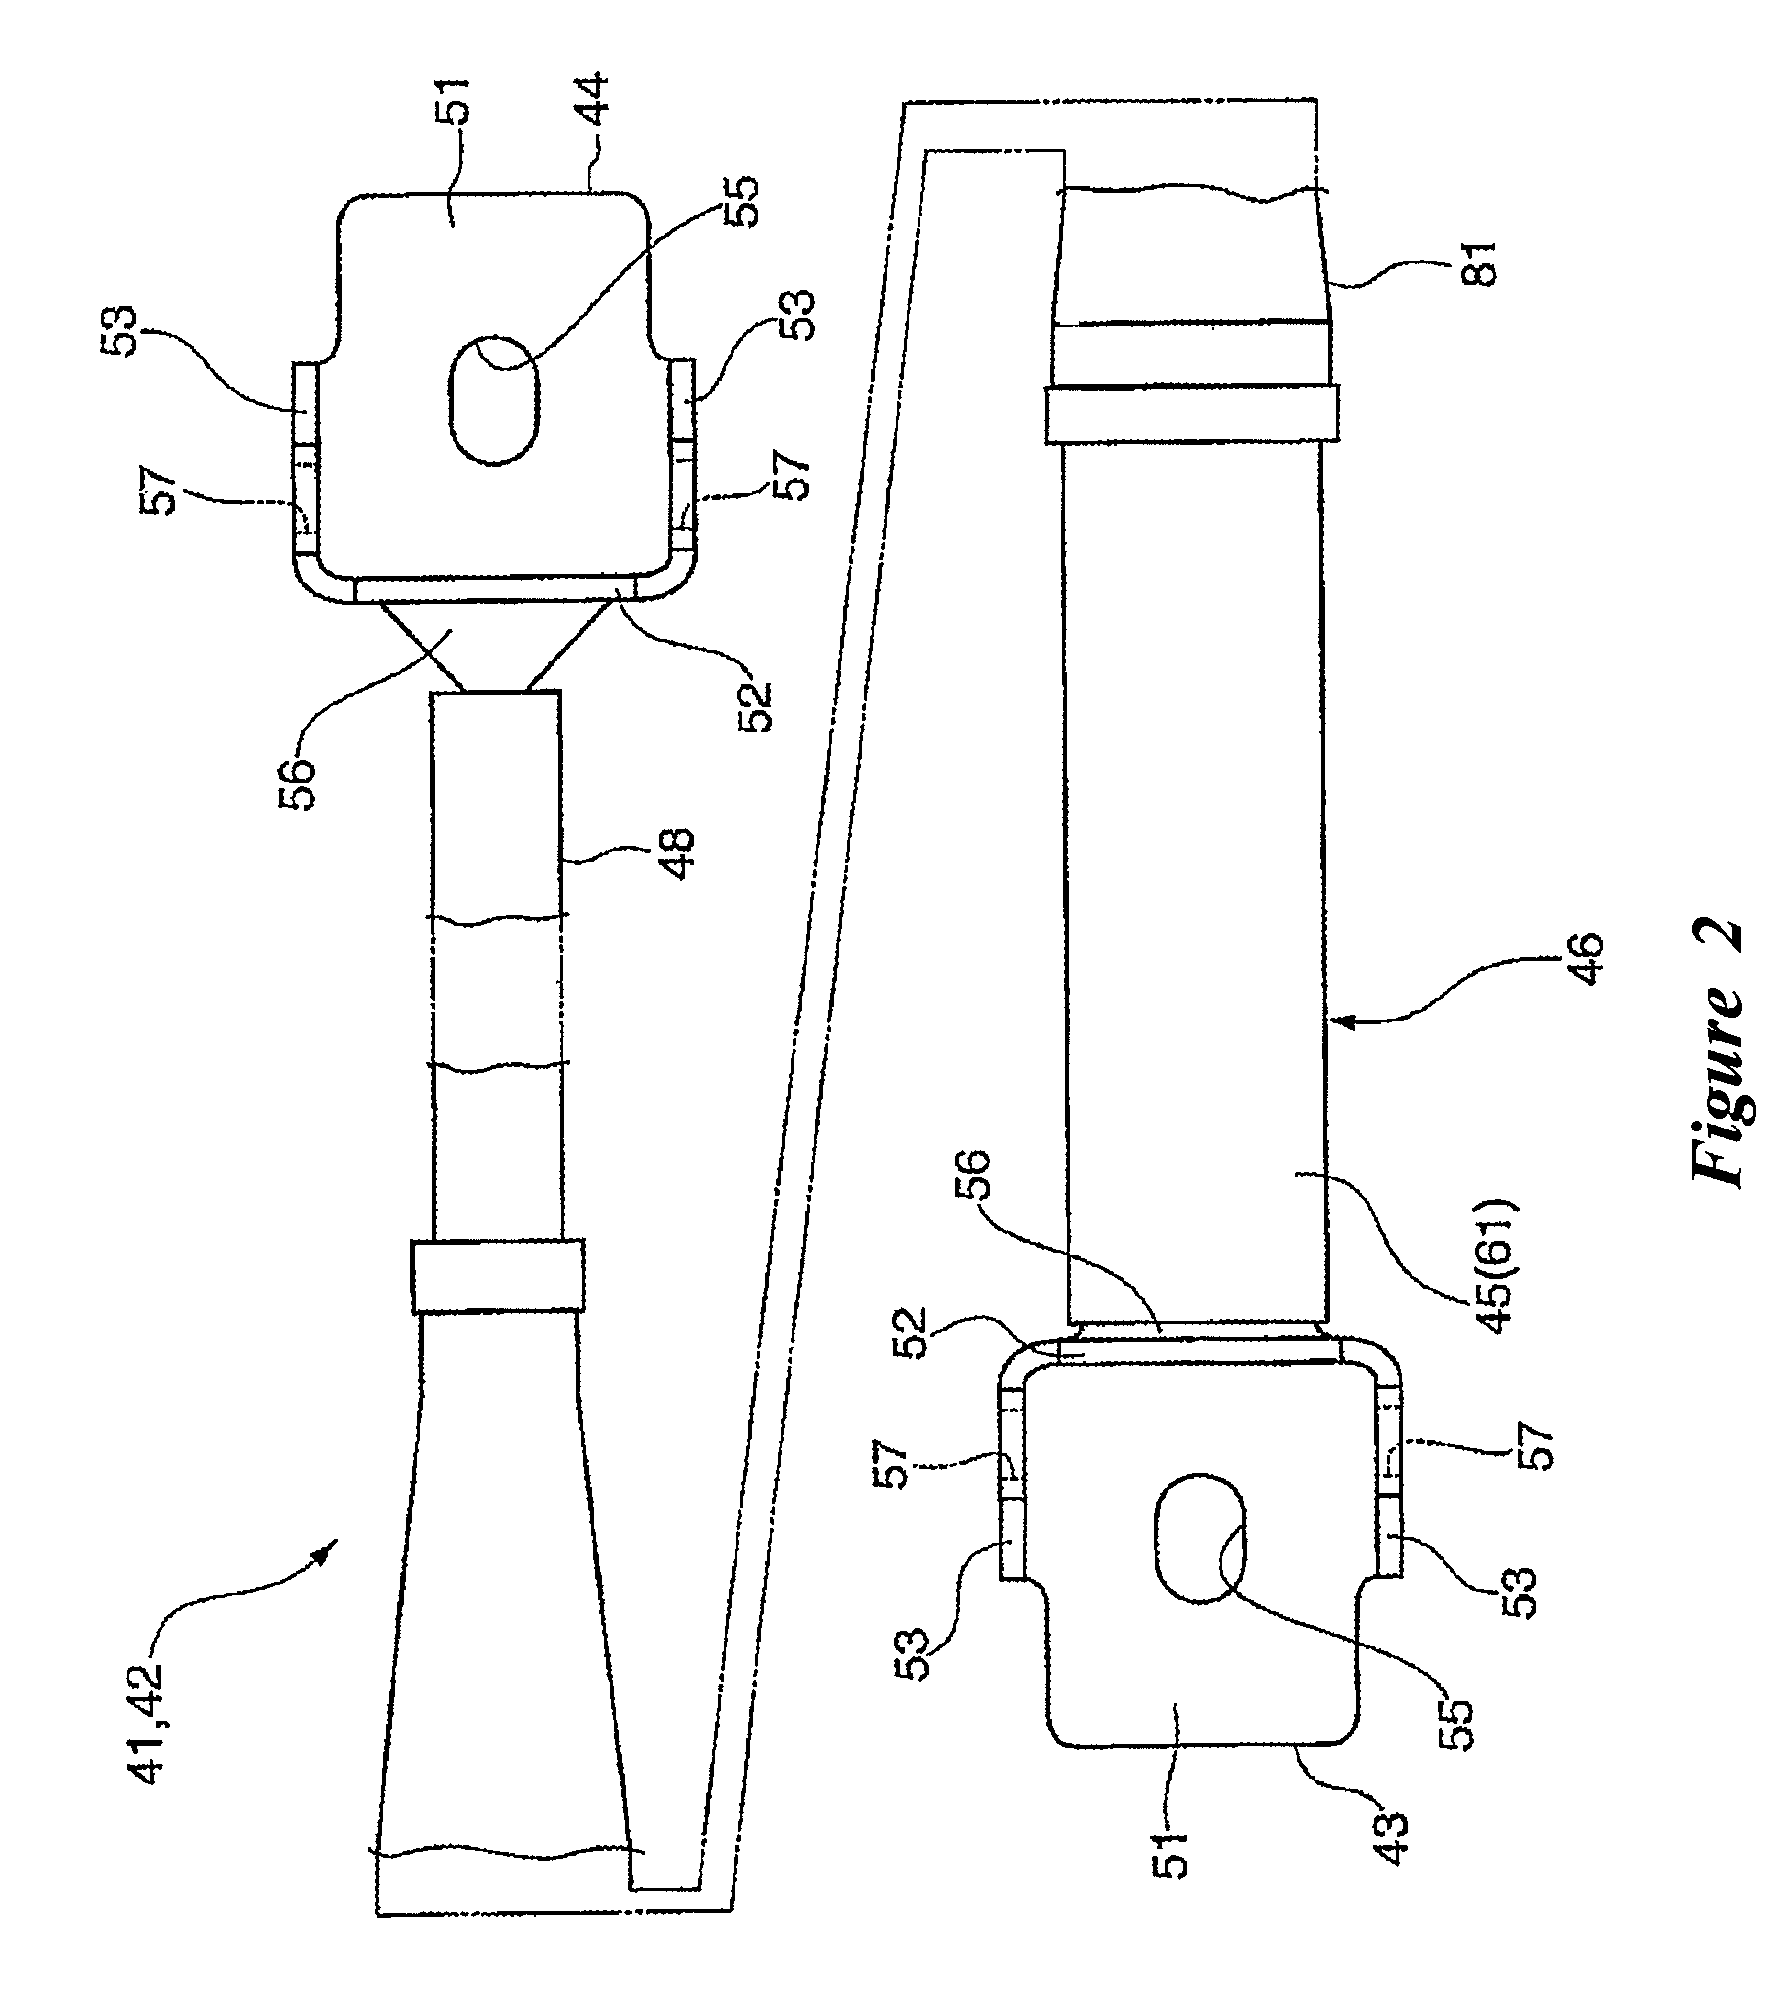 Device for reinforcing vehicle body of vehicle